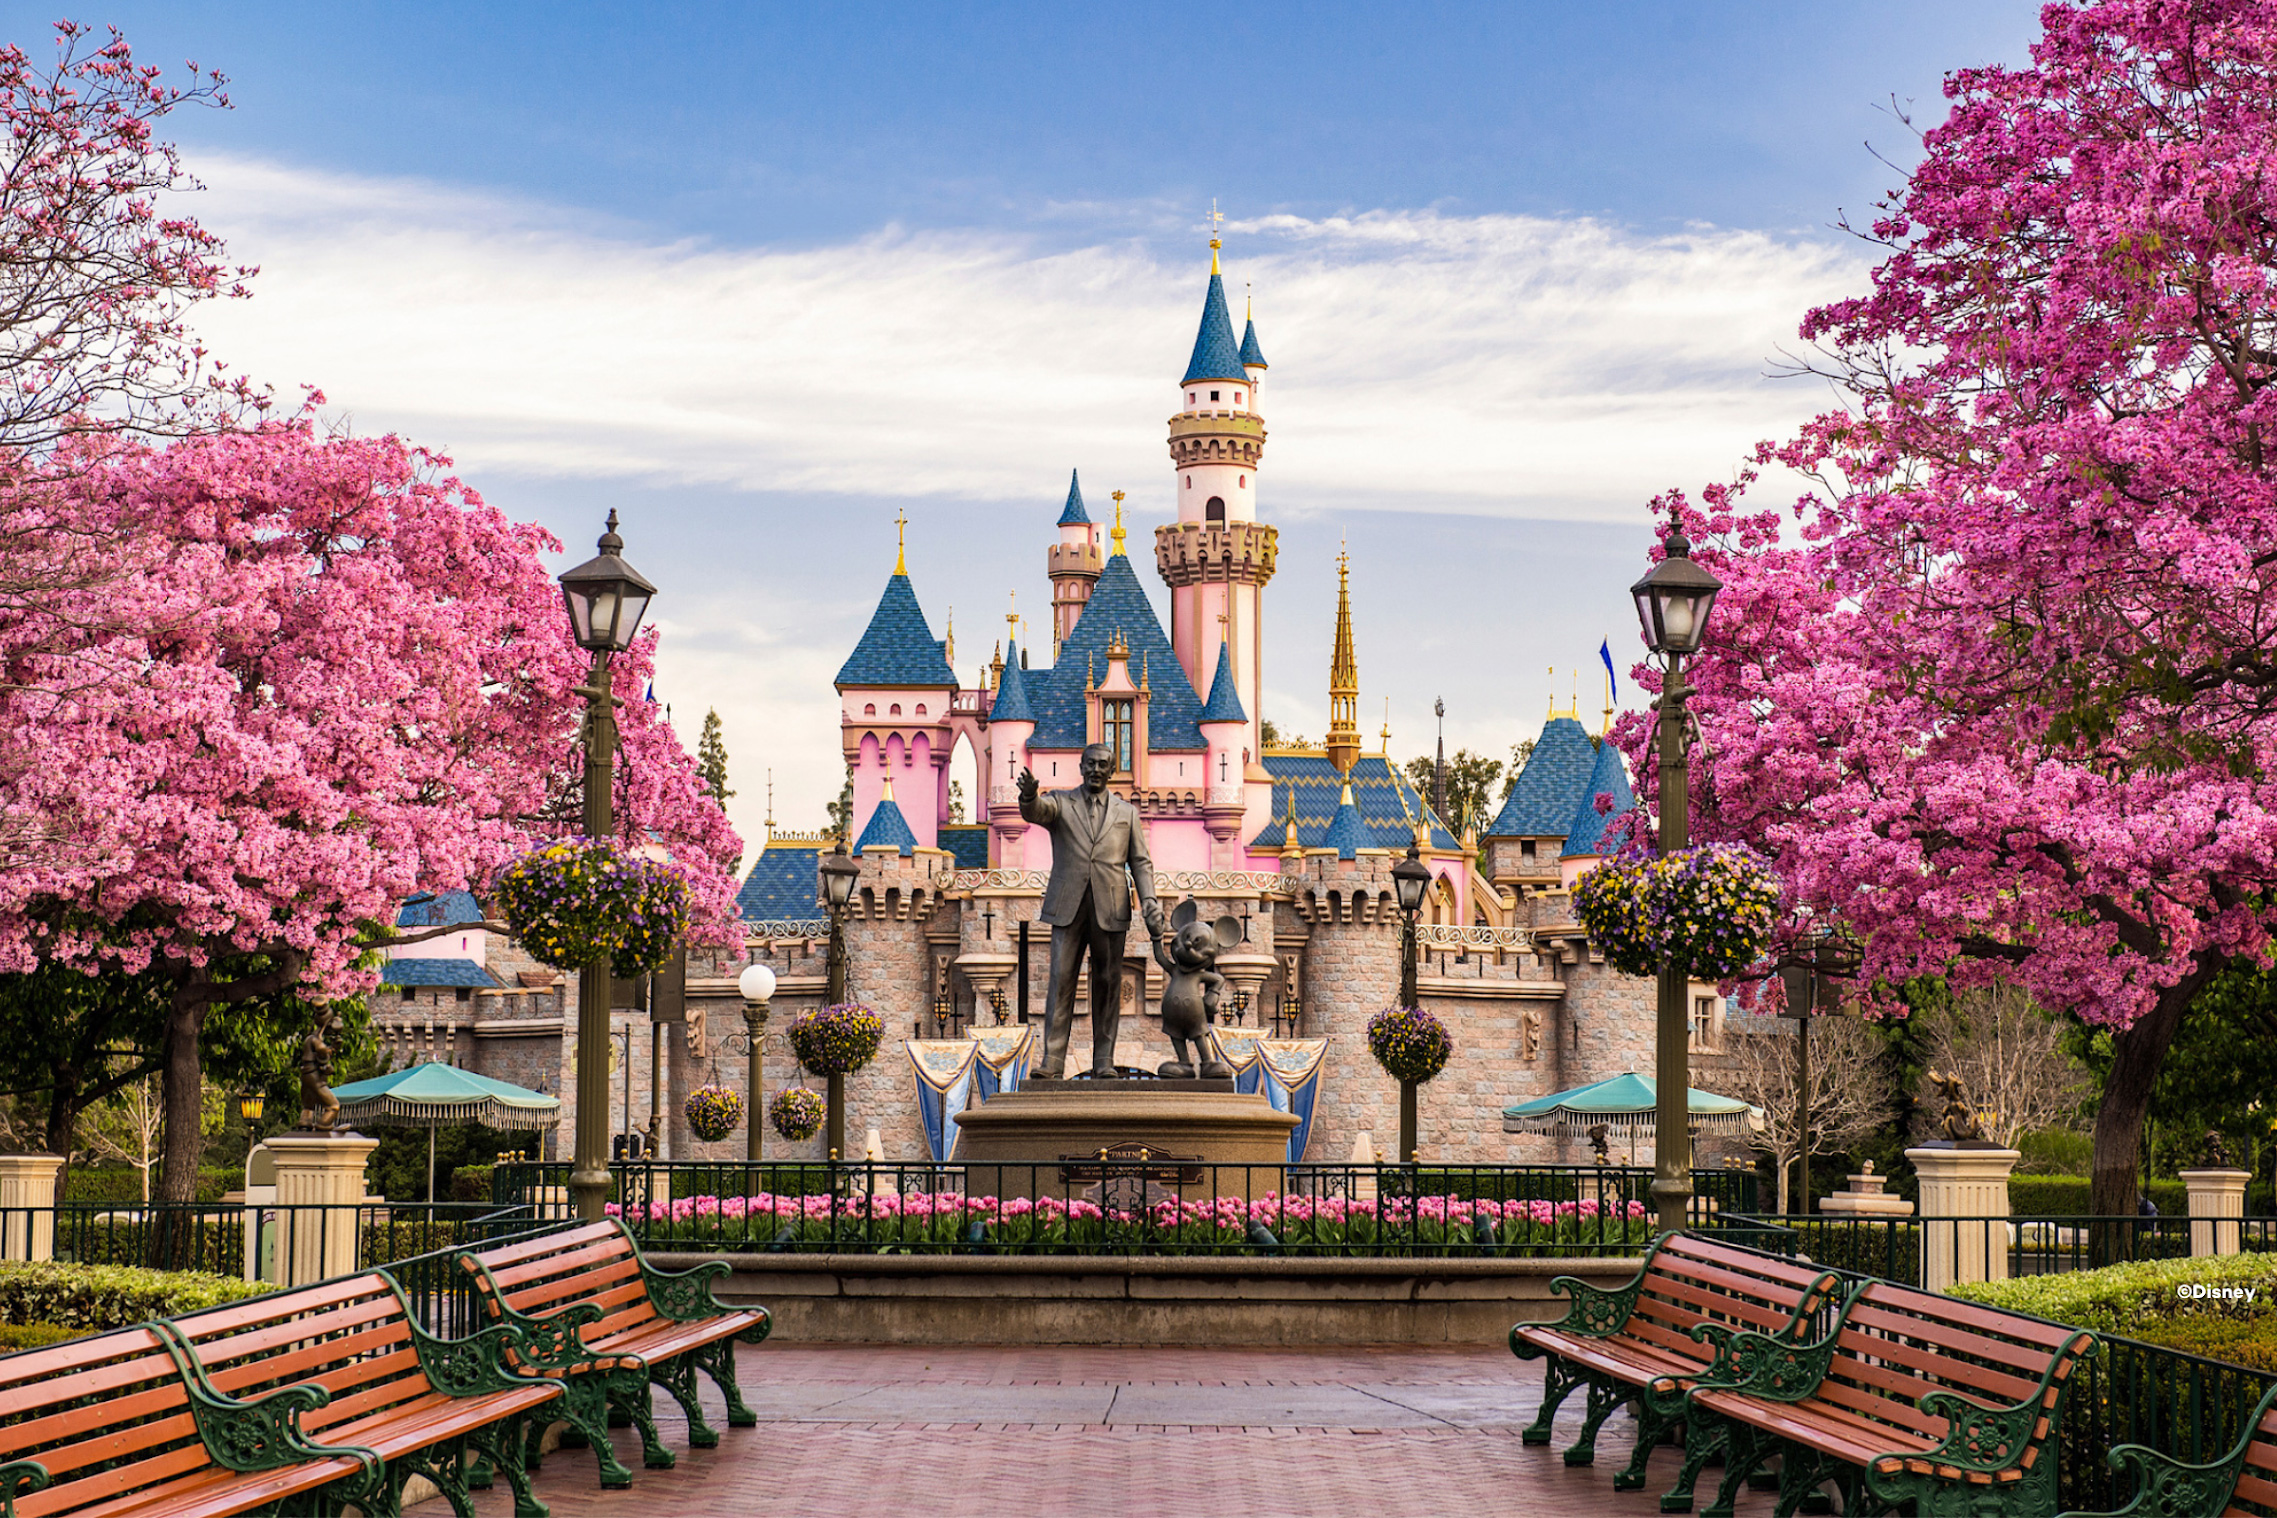 Maximize Your Disneyland Experience with These Essential Trip Planning Tips